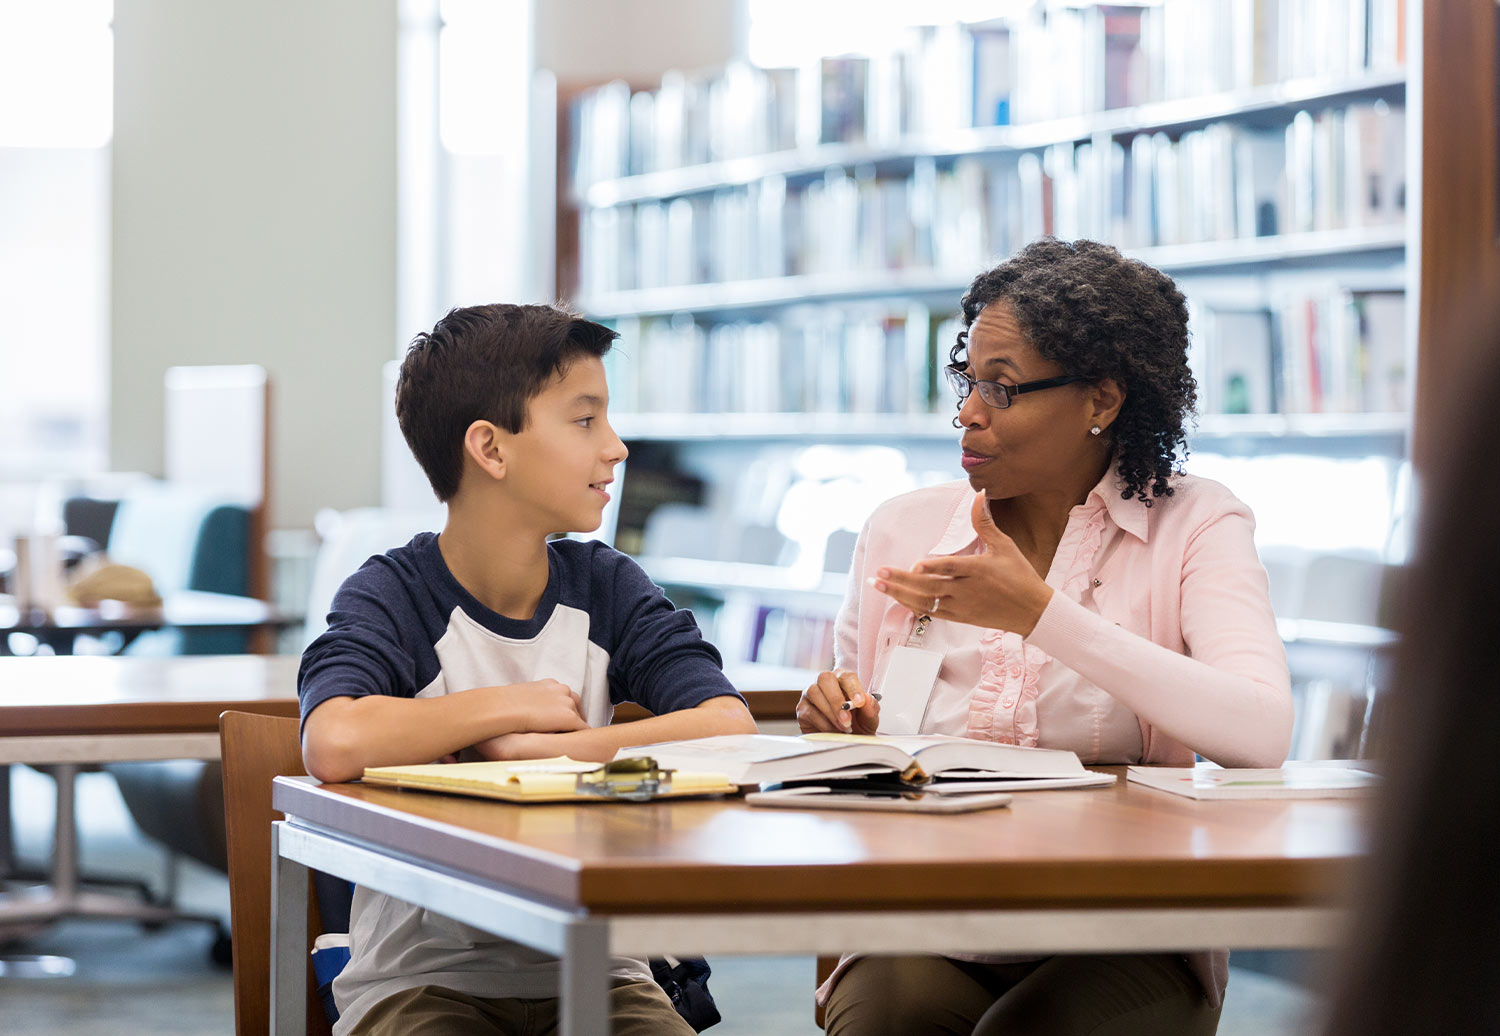 a young boy and woman do work together at a library study table